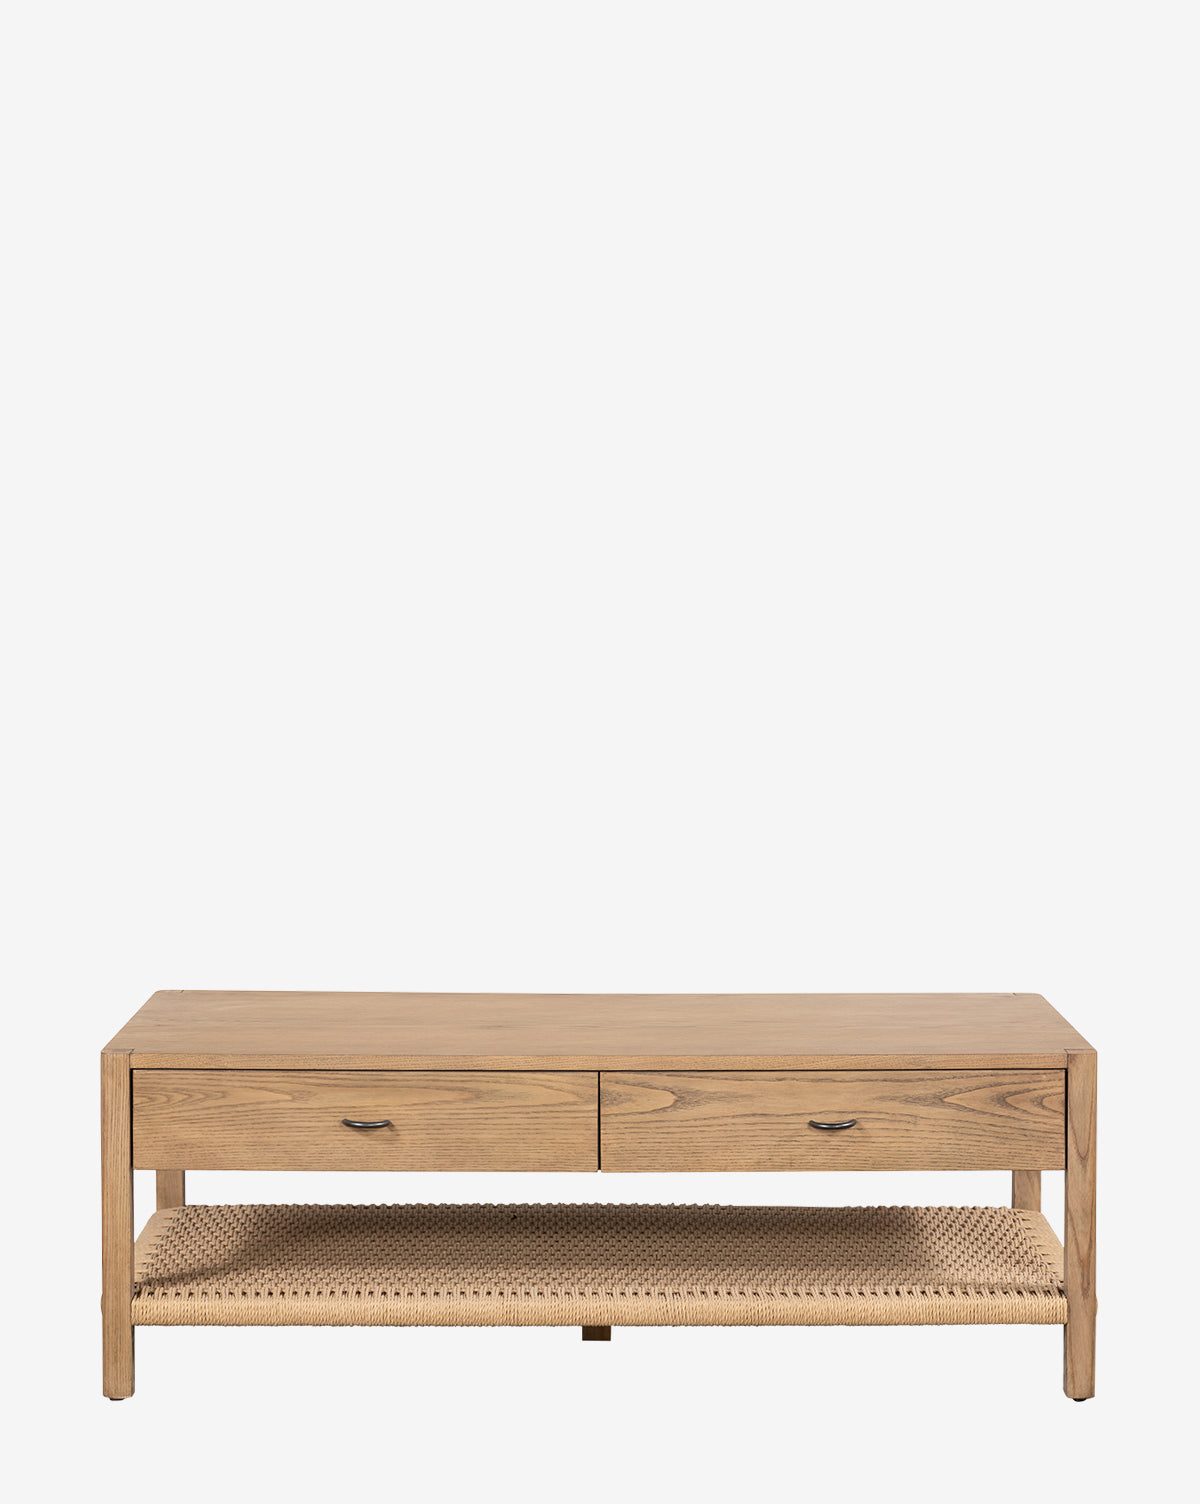 Four Hands, Haran Coffee Table